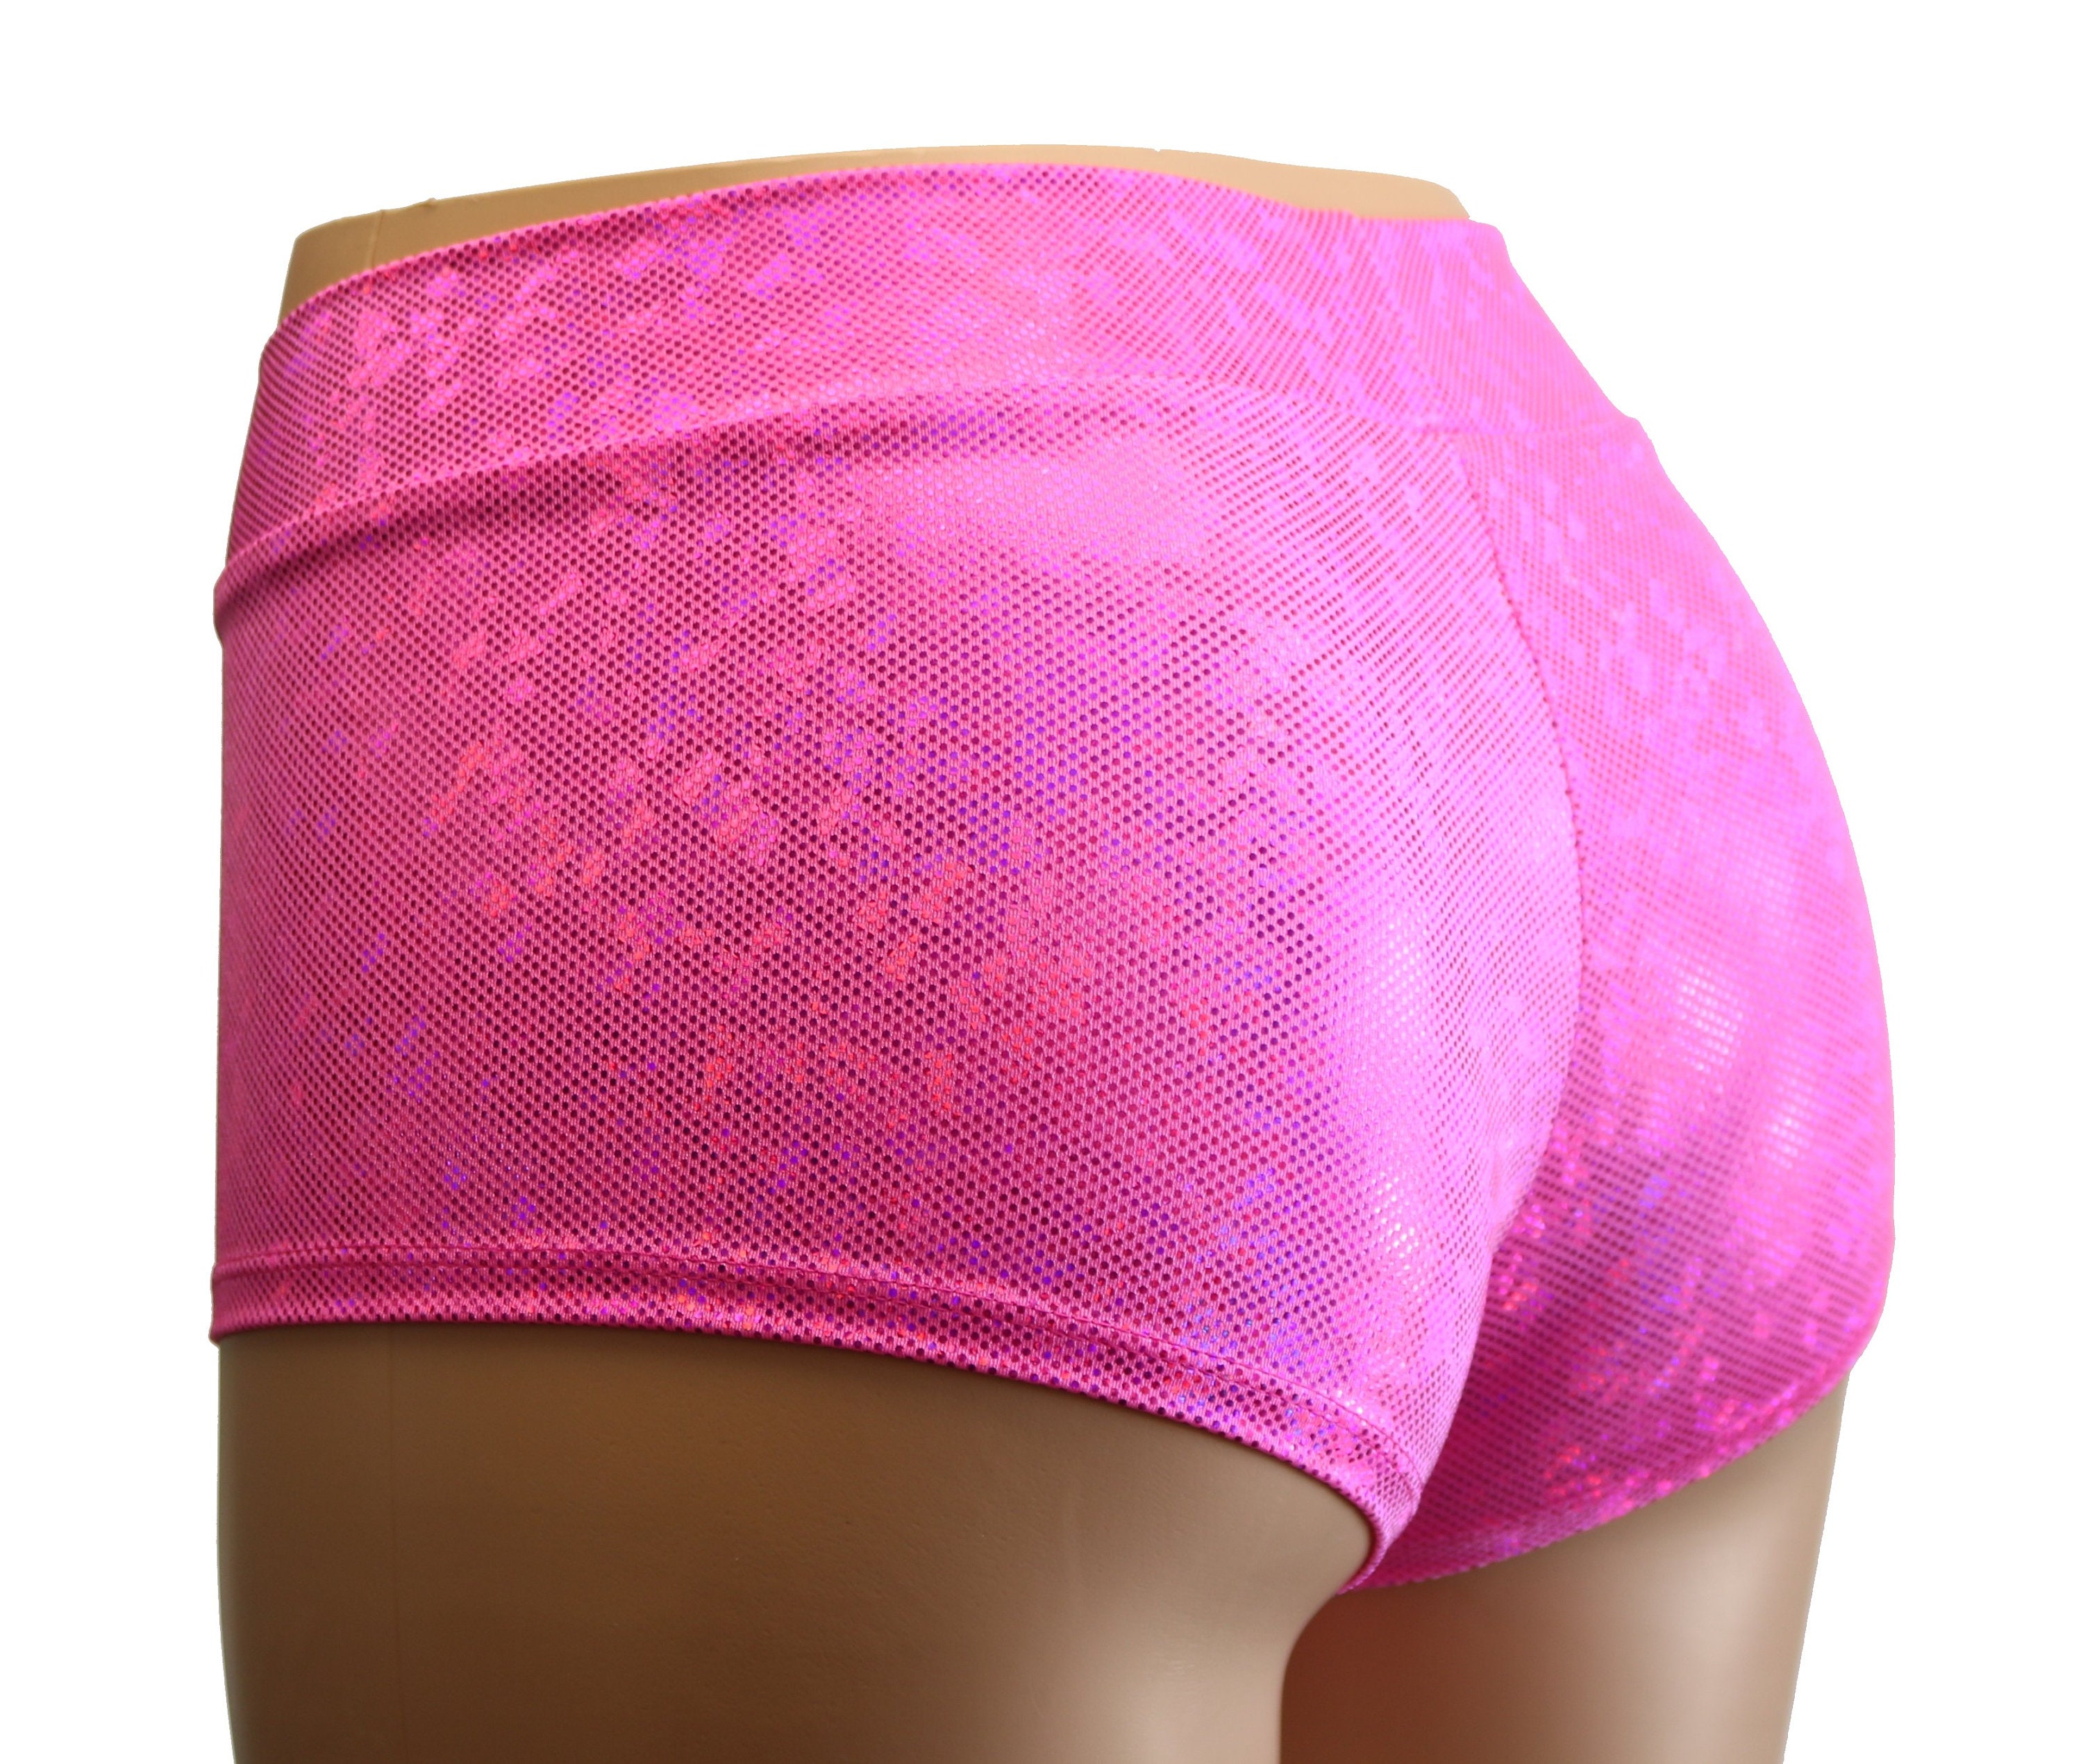 Hot Pink Holographic Cheeky Booty Shorts. SUPER GLOW for Blacklight Parties  -  Sweden